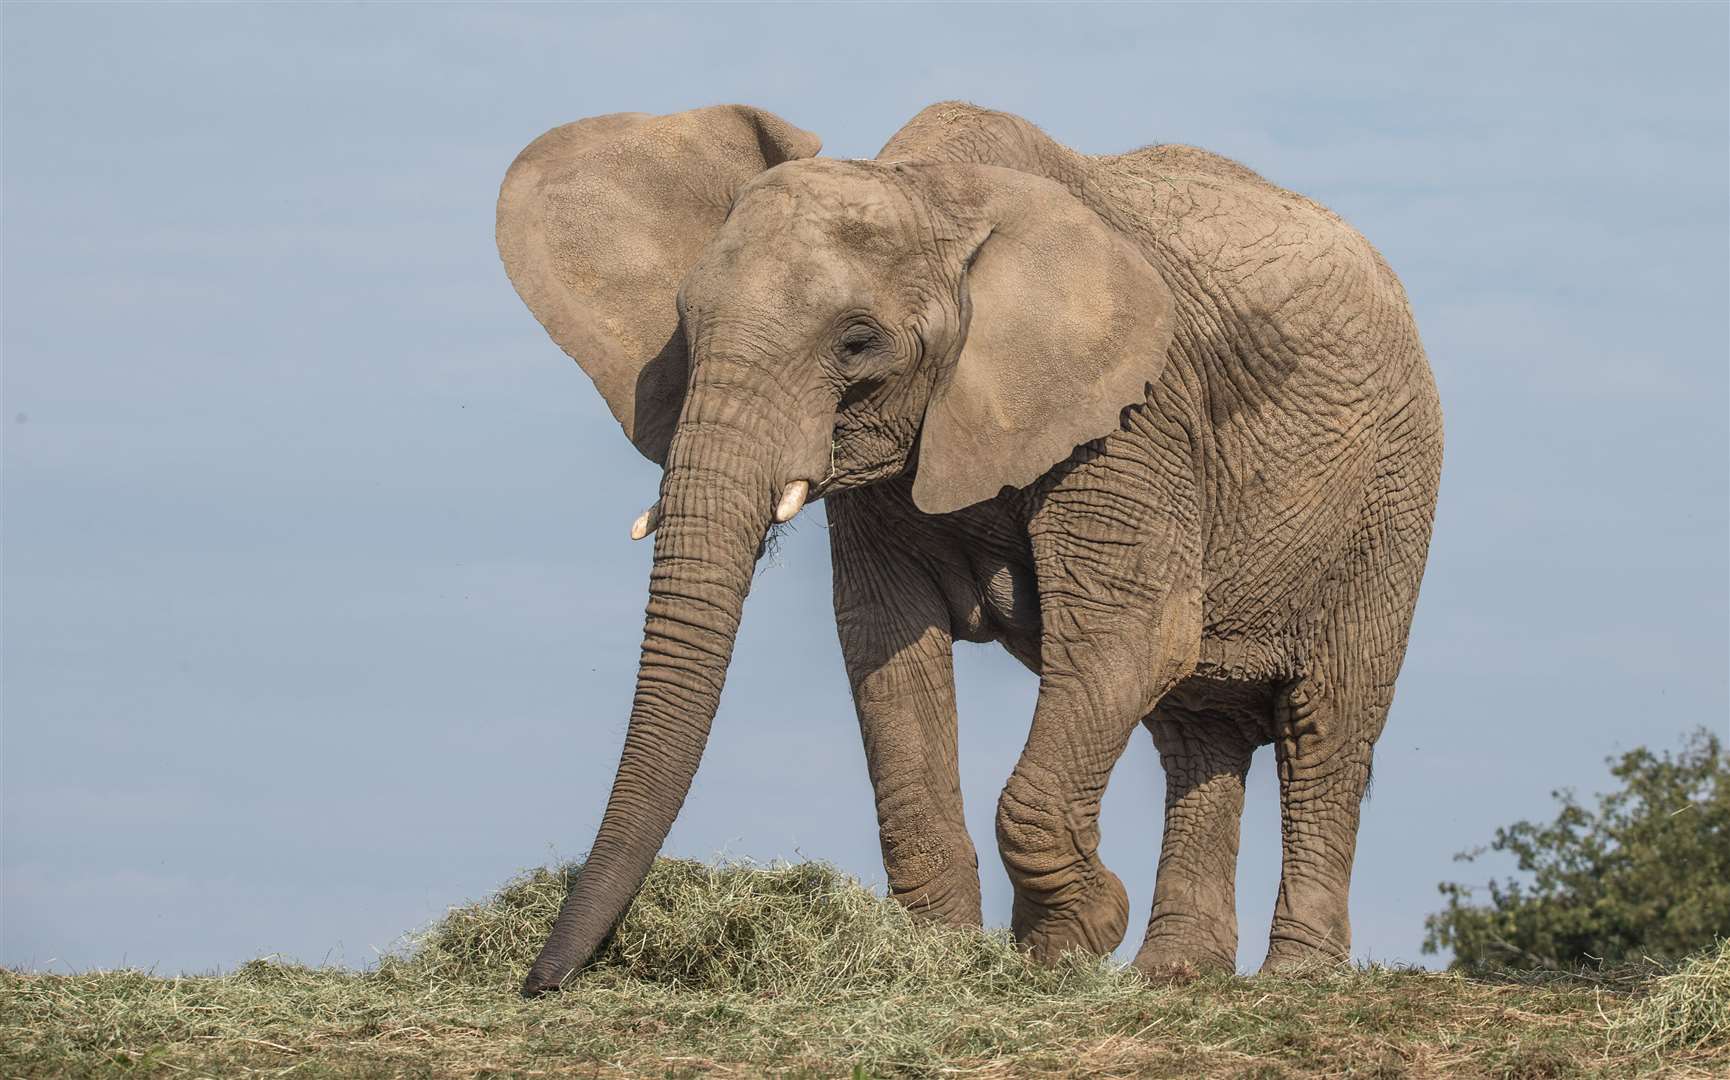 Jama will be one of 13 elephants to start a new life in Kenya